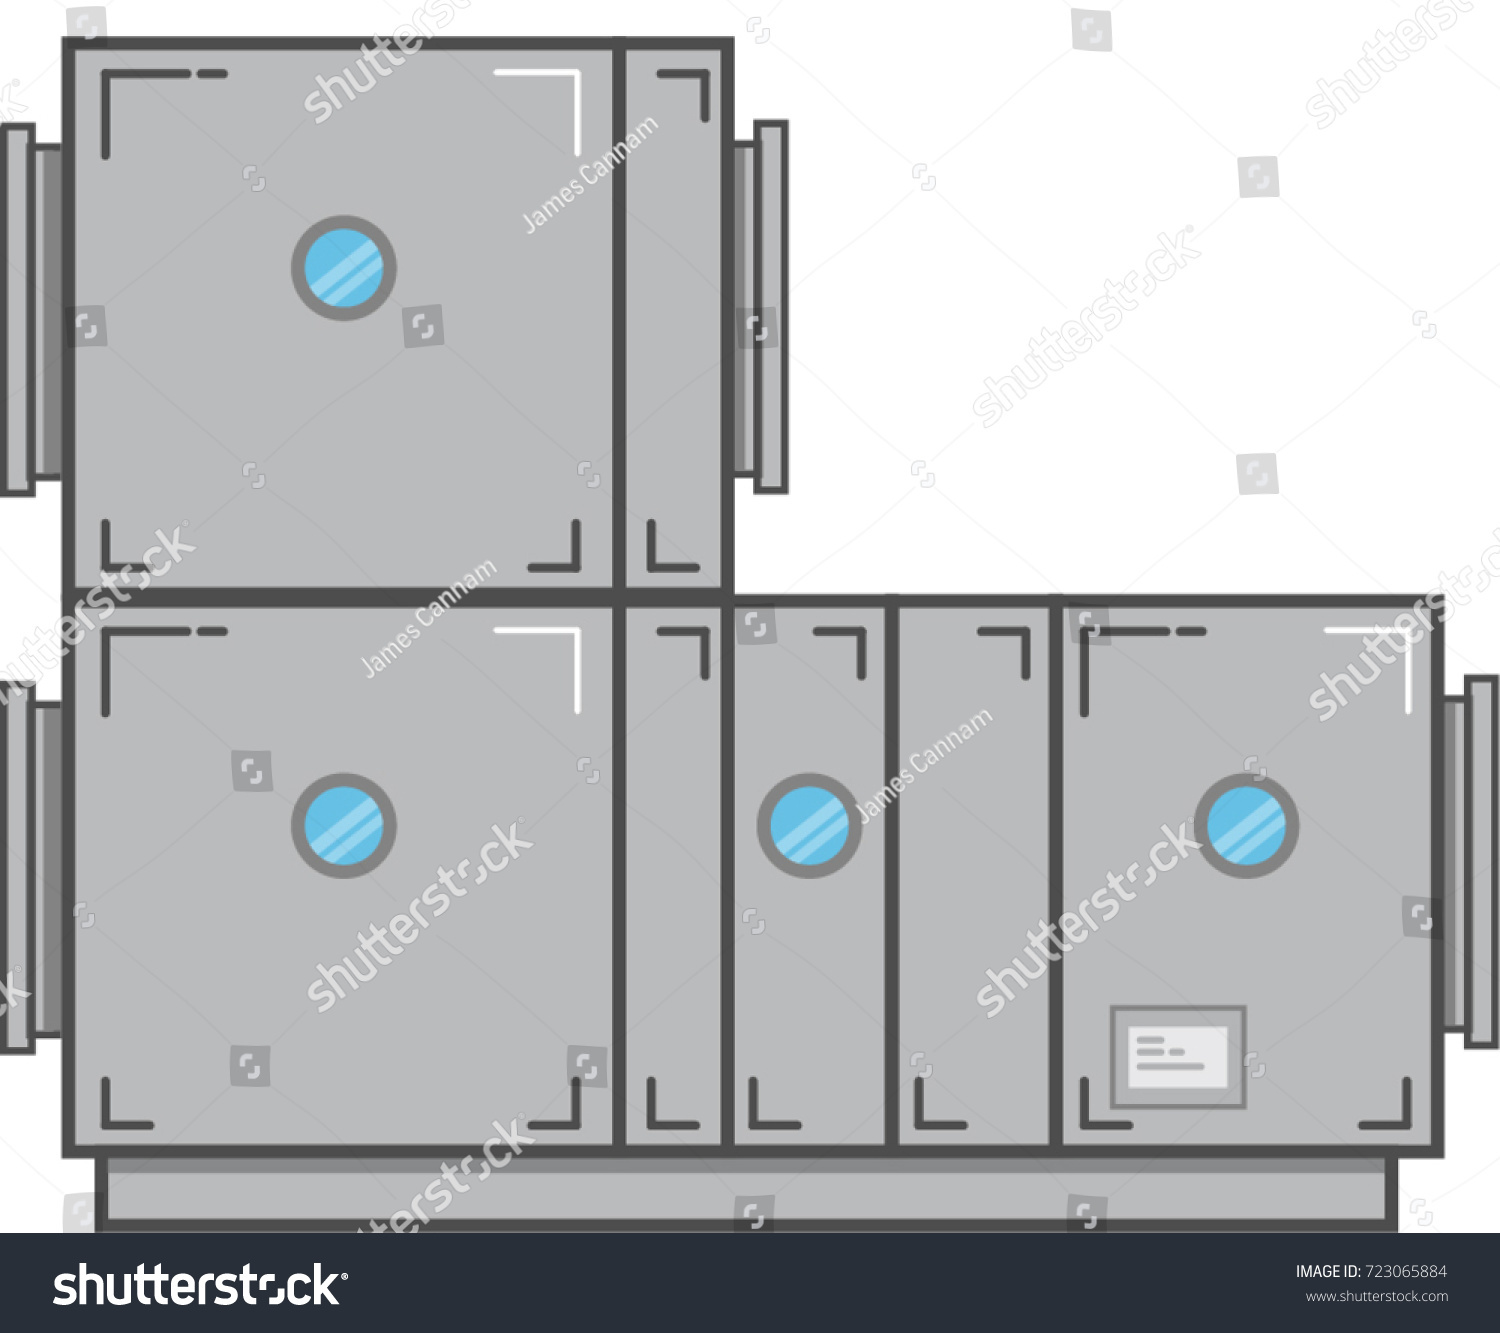 Double Stack Air Handling Unit Vector Stock Vector Royalty Free 723065884